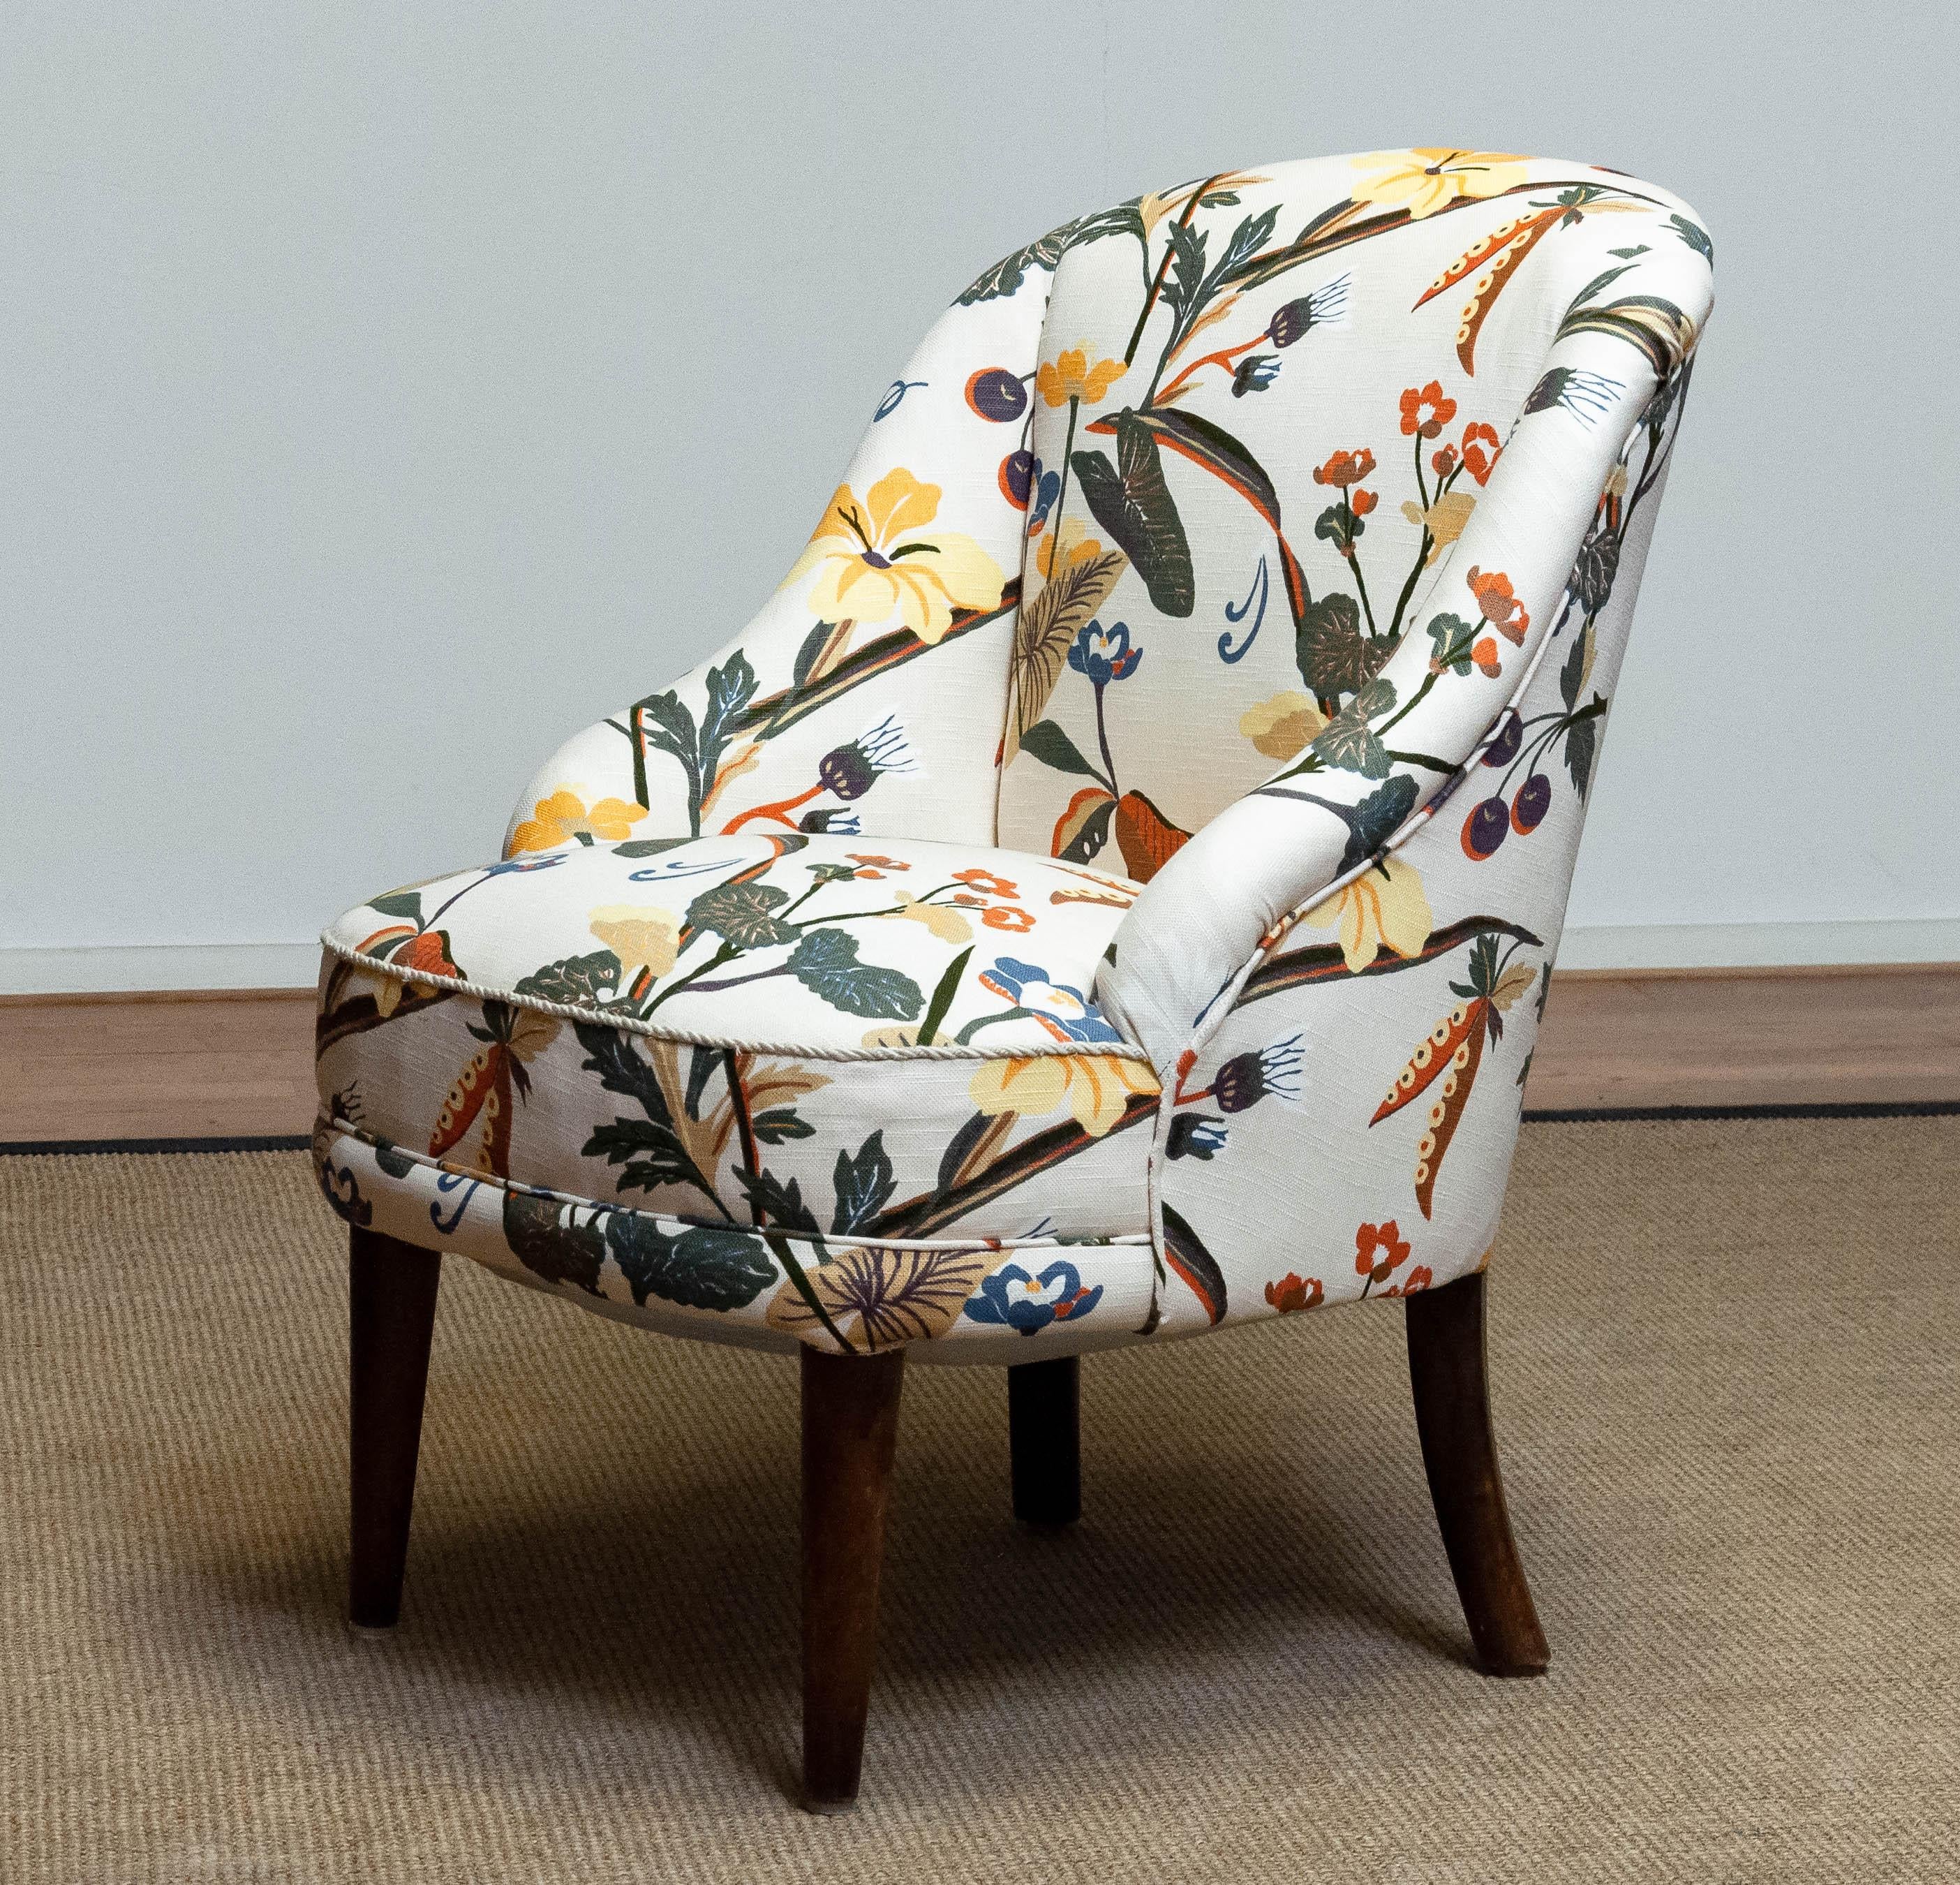 Beautiful Danish slipper chair from the 1940s new upholstered with floral printed linen similar to the famous and bright Josef Frank fabrics. Frame and legs are made of beech and both in good condition. Hand-tied springs and webbing are also in very